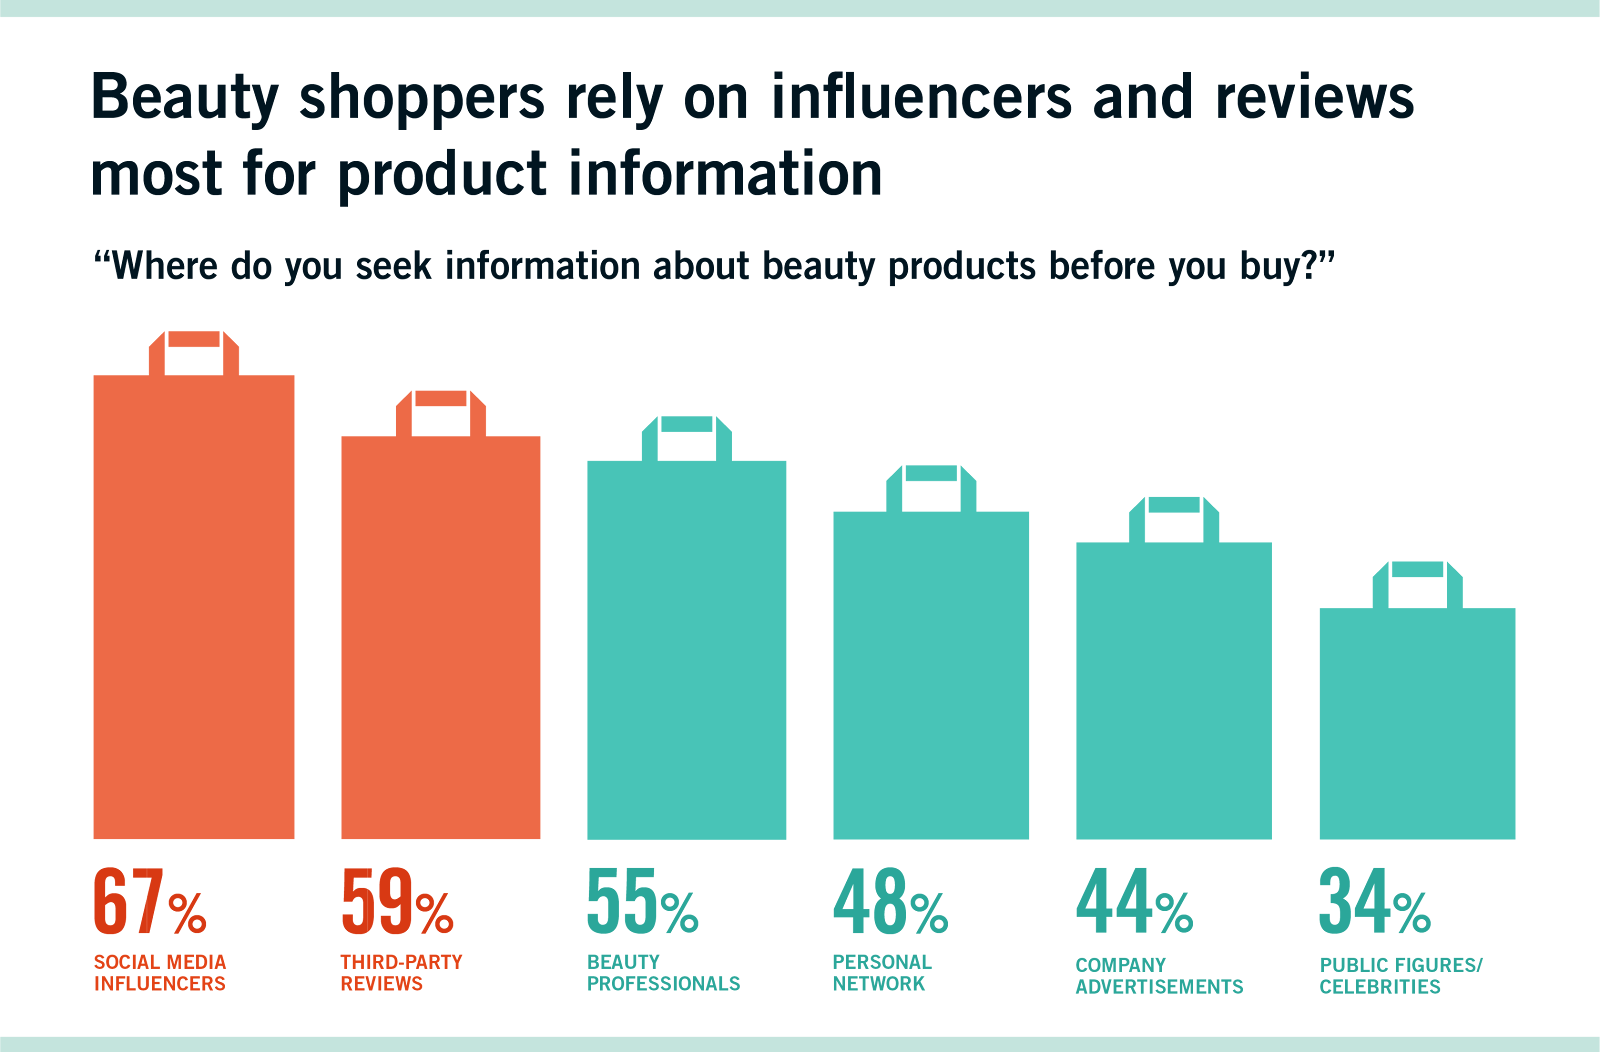 Beauty shoppers rely on influencers before buying